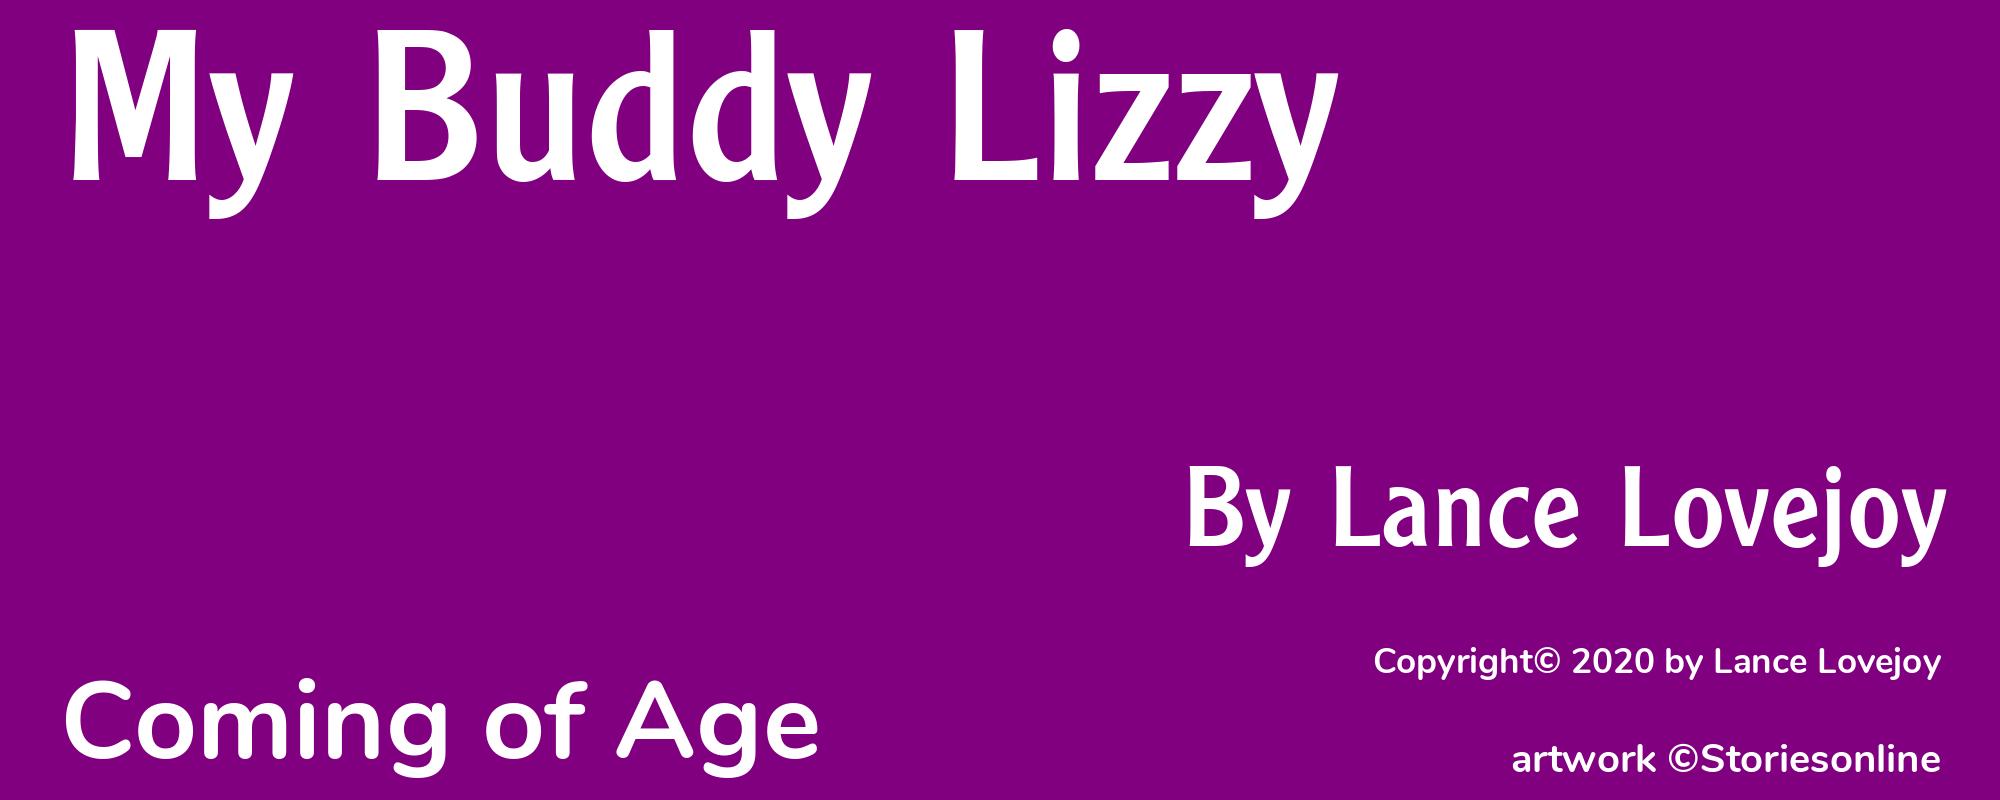 My Buddy Lizzy - Cover